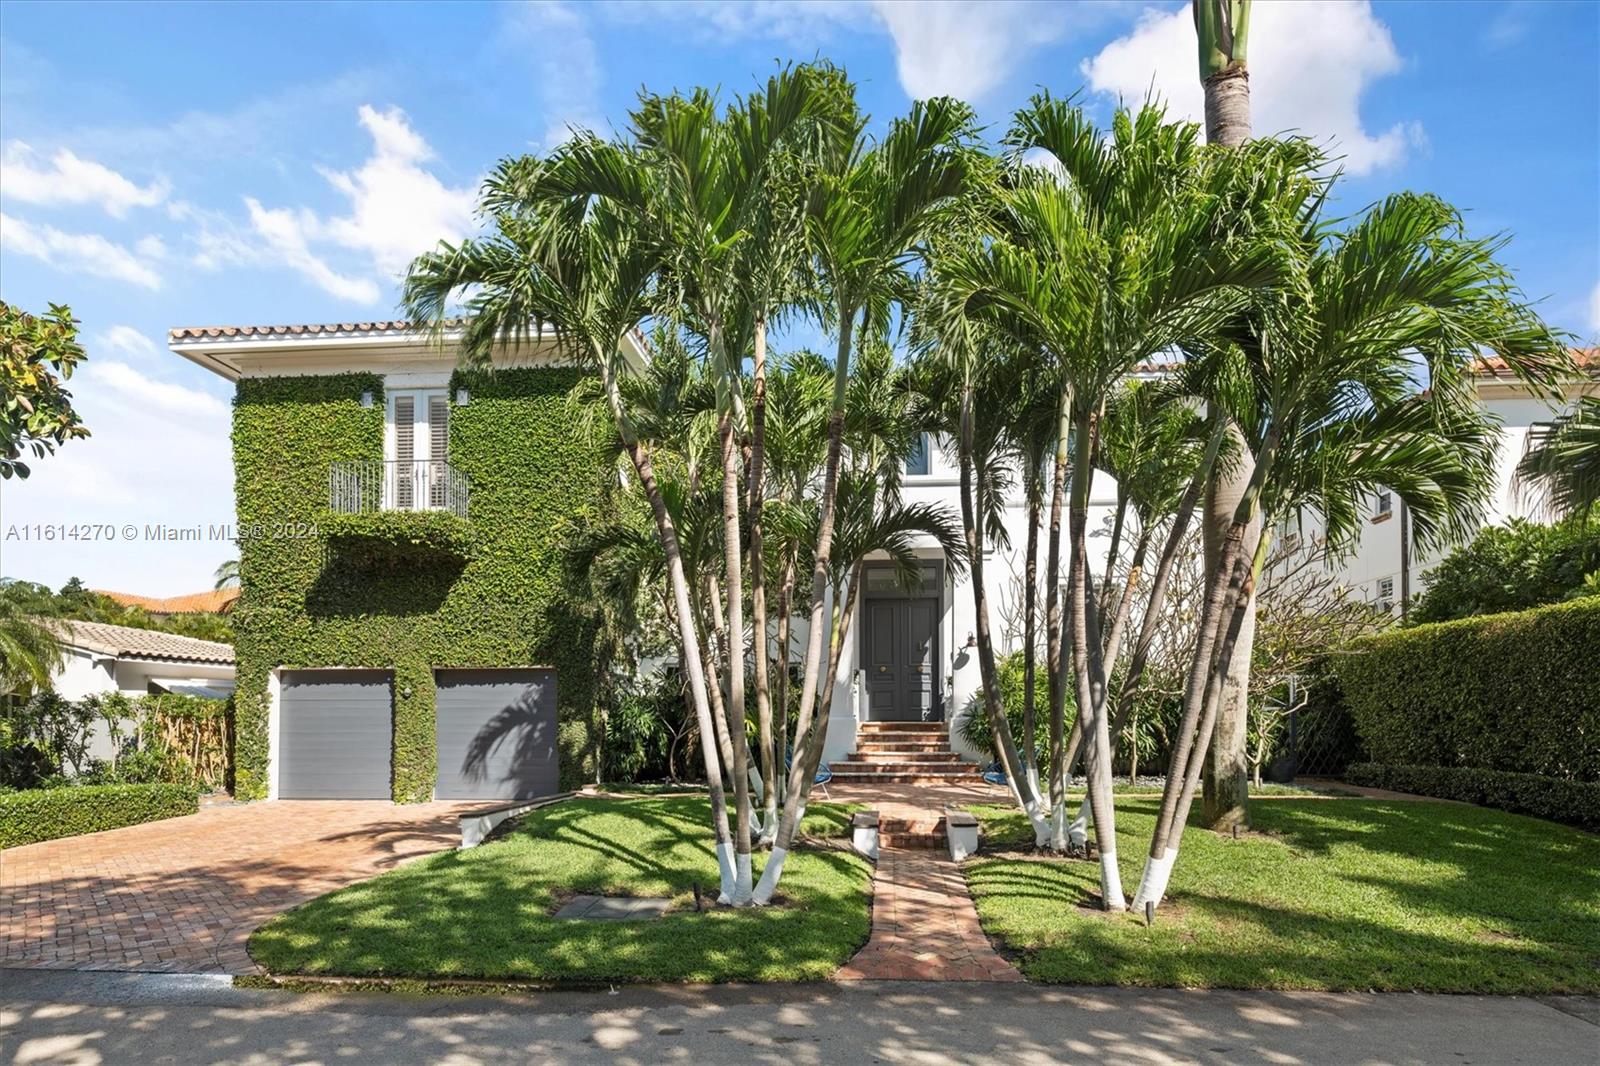 This is a unique, architecturally custom-designed home in Key Biscayne with a distinct floor plan, 6 Bed / 6 Bath home (including staff quarters), 10.5 ft ceiling height, attention to detail, high-quality materials, and top-of-the-line appliances. The living, dining and family room open to a large covered terrace with a salt-water-system pool and landscaped garden, perfect for entertaining. Upstairs, there is a second family room, four spacious bedrooms with ensuite bathrooms, and a balcony with a covered sitting area that offers a view of Key Biscayne and the sky. The high ceiling enclosed 2-car garage has built-in cabinets and ample storage. The house is updated and offers a sense of warmth, comfort and timeless elegance.